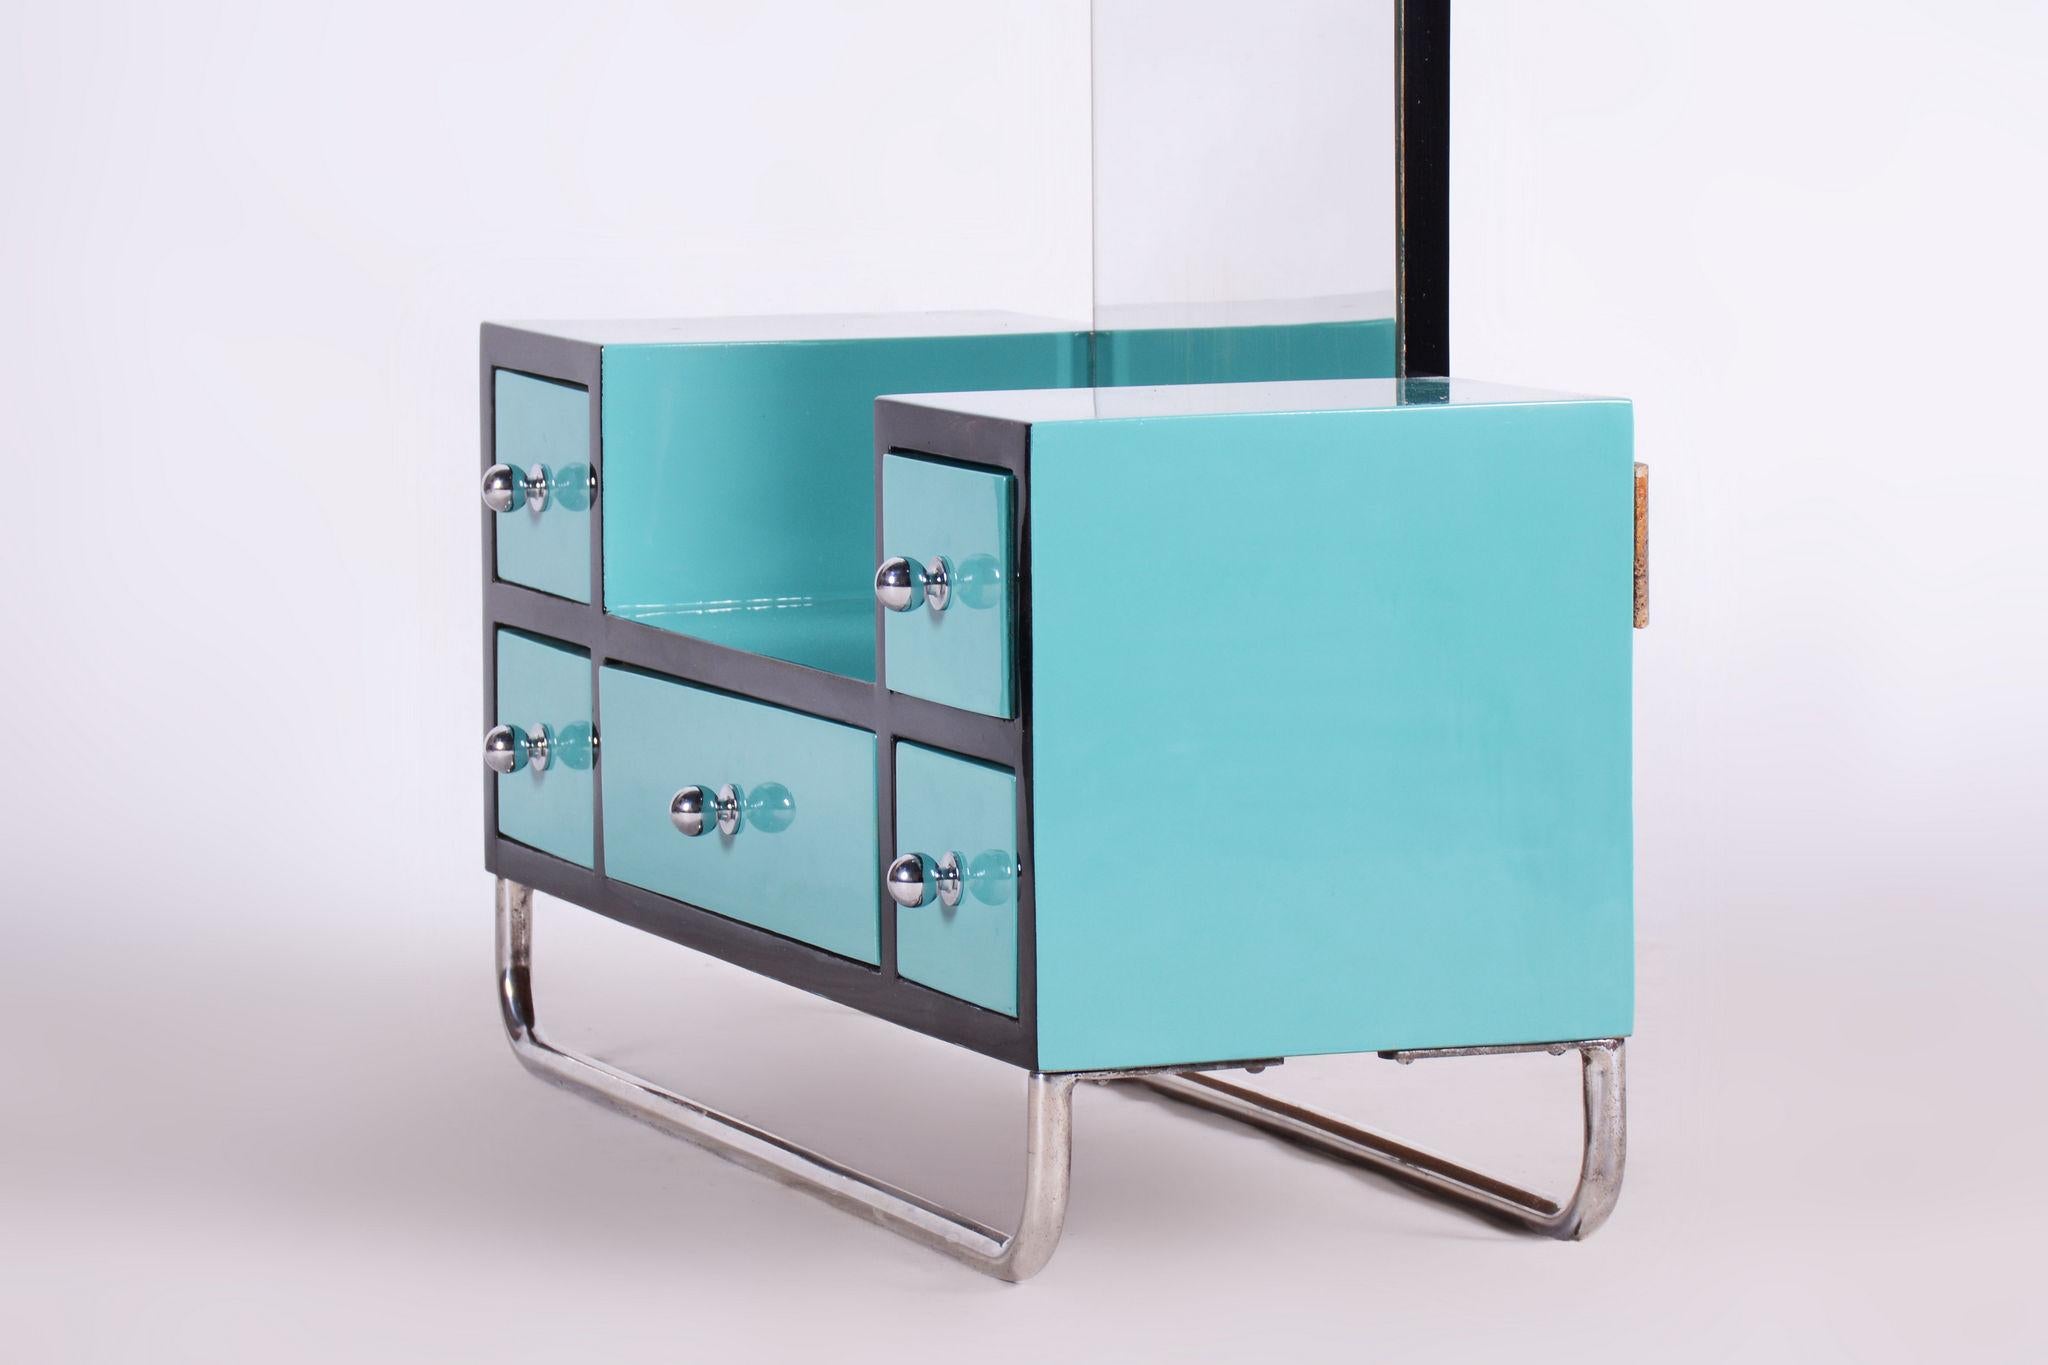 Restored Bauhaus Dressing Mirror, Chrome, Steel, Lacquered Wood, Czechia, 1930s In Good Condition For Sale In Horomerice, CZ